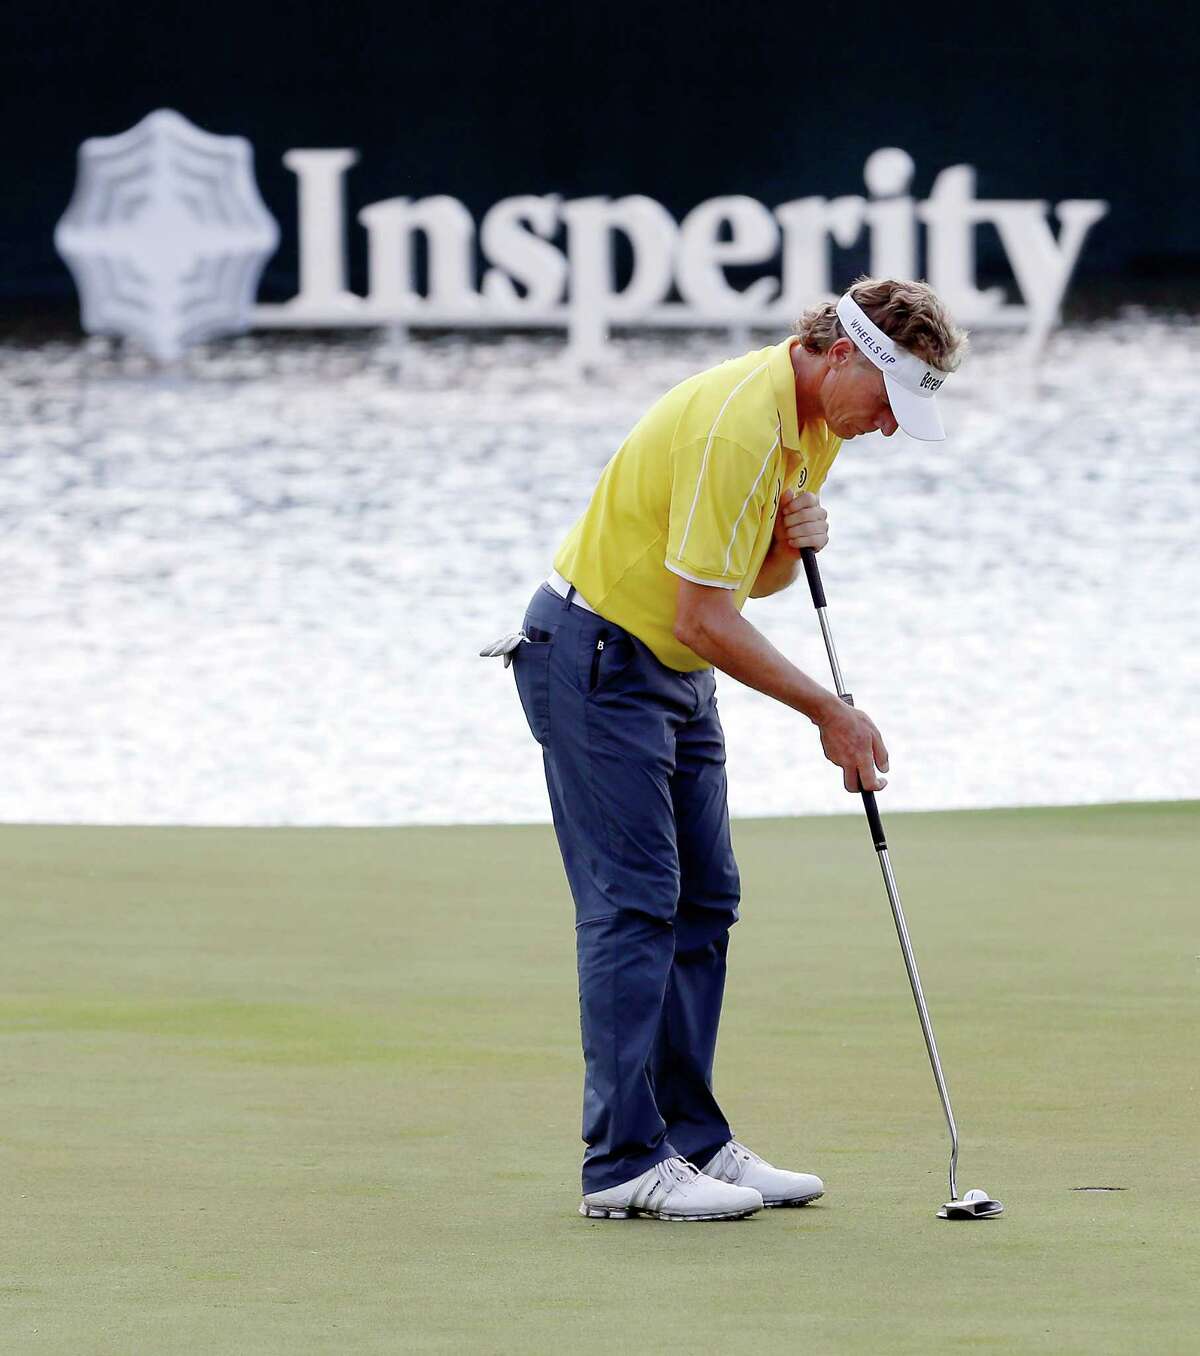 Leader Bernhard Langer putts on the 18th green during the second round of the Insperity Invitational at the The Woodlands Country Club Saturday, May 5, 2018, in The Woodlands, TX. (Michael Wyke / For the Chronicle)